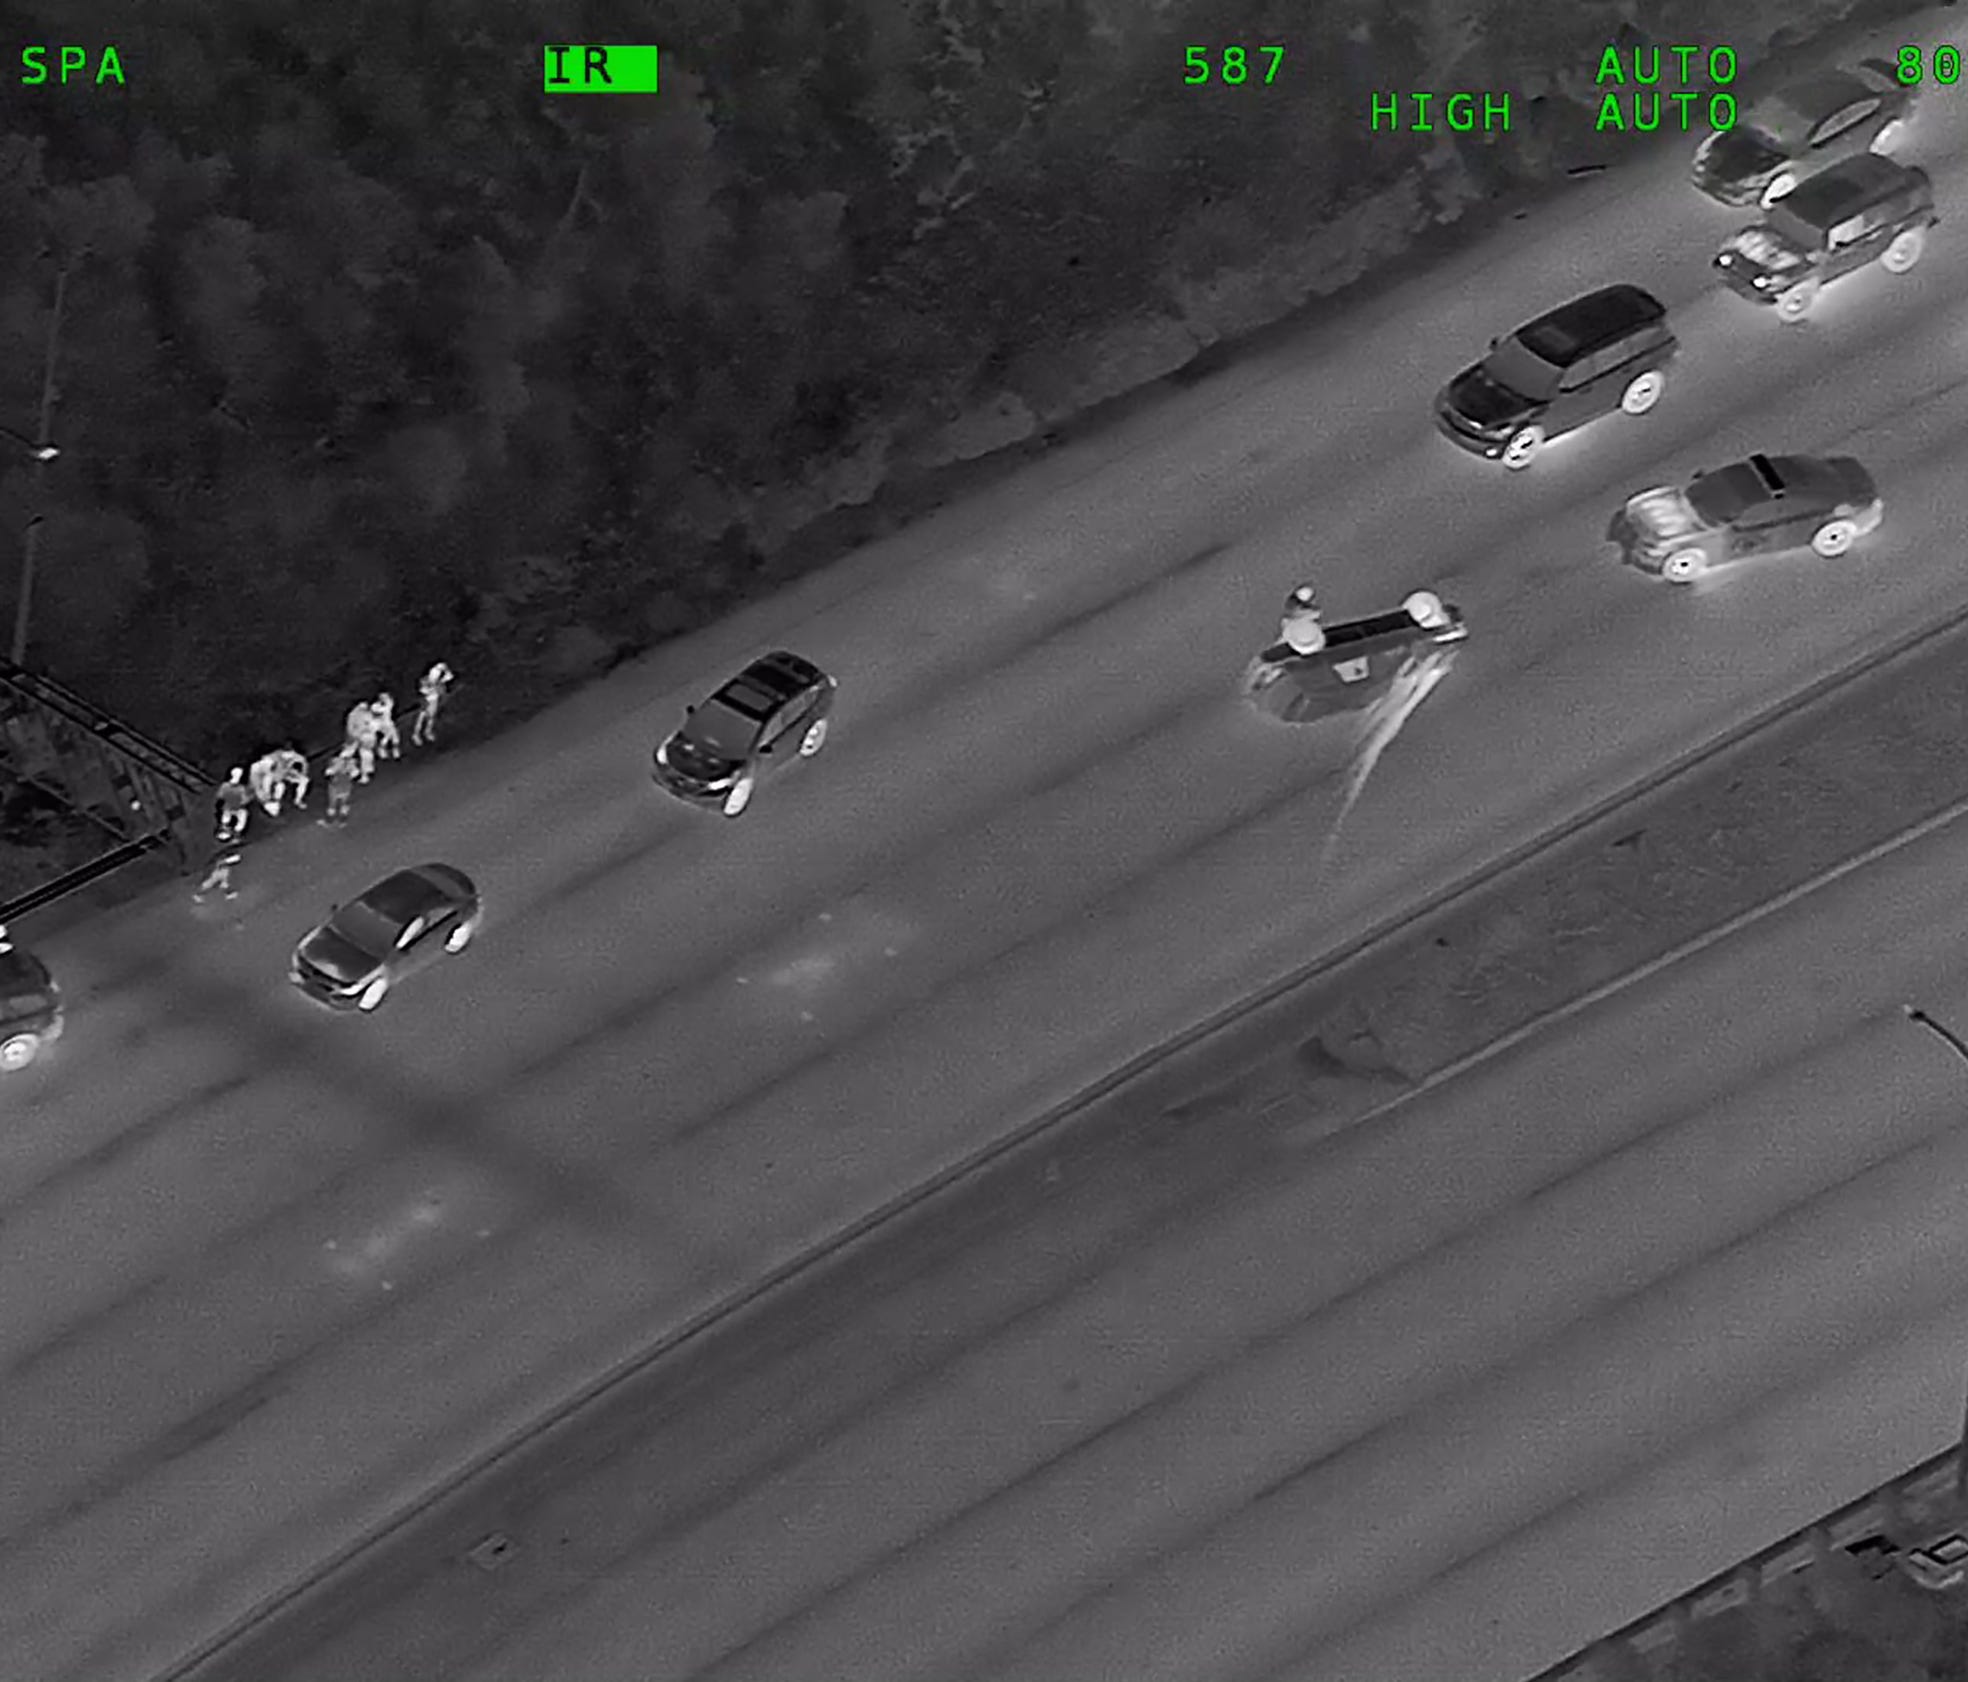 This image using forward-looking infrared technology from the California HIghway Patrol shows an overturned SUV May 26, 2018, in the southbound lanes of U.S. 101 in Sausalito, California. Highway Patrol officers and Sausalito police later found the d